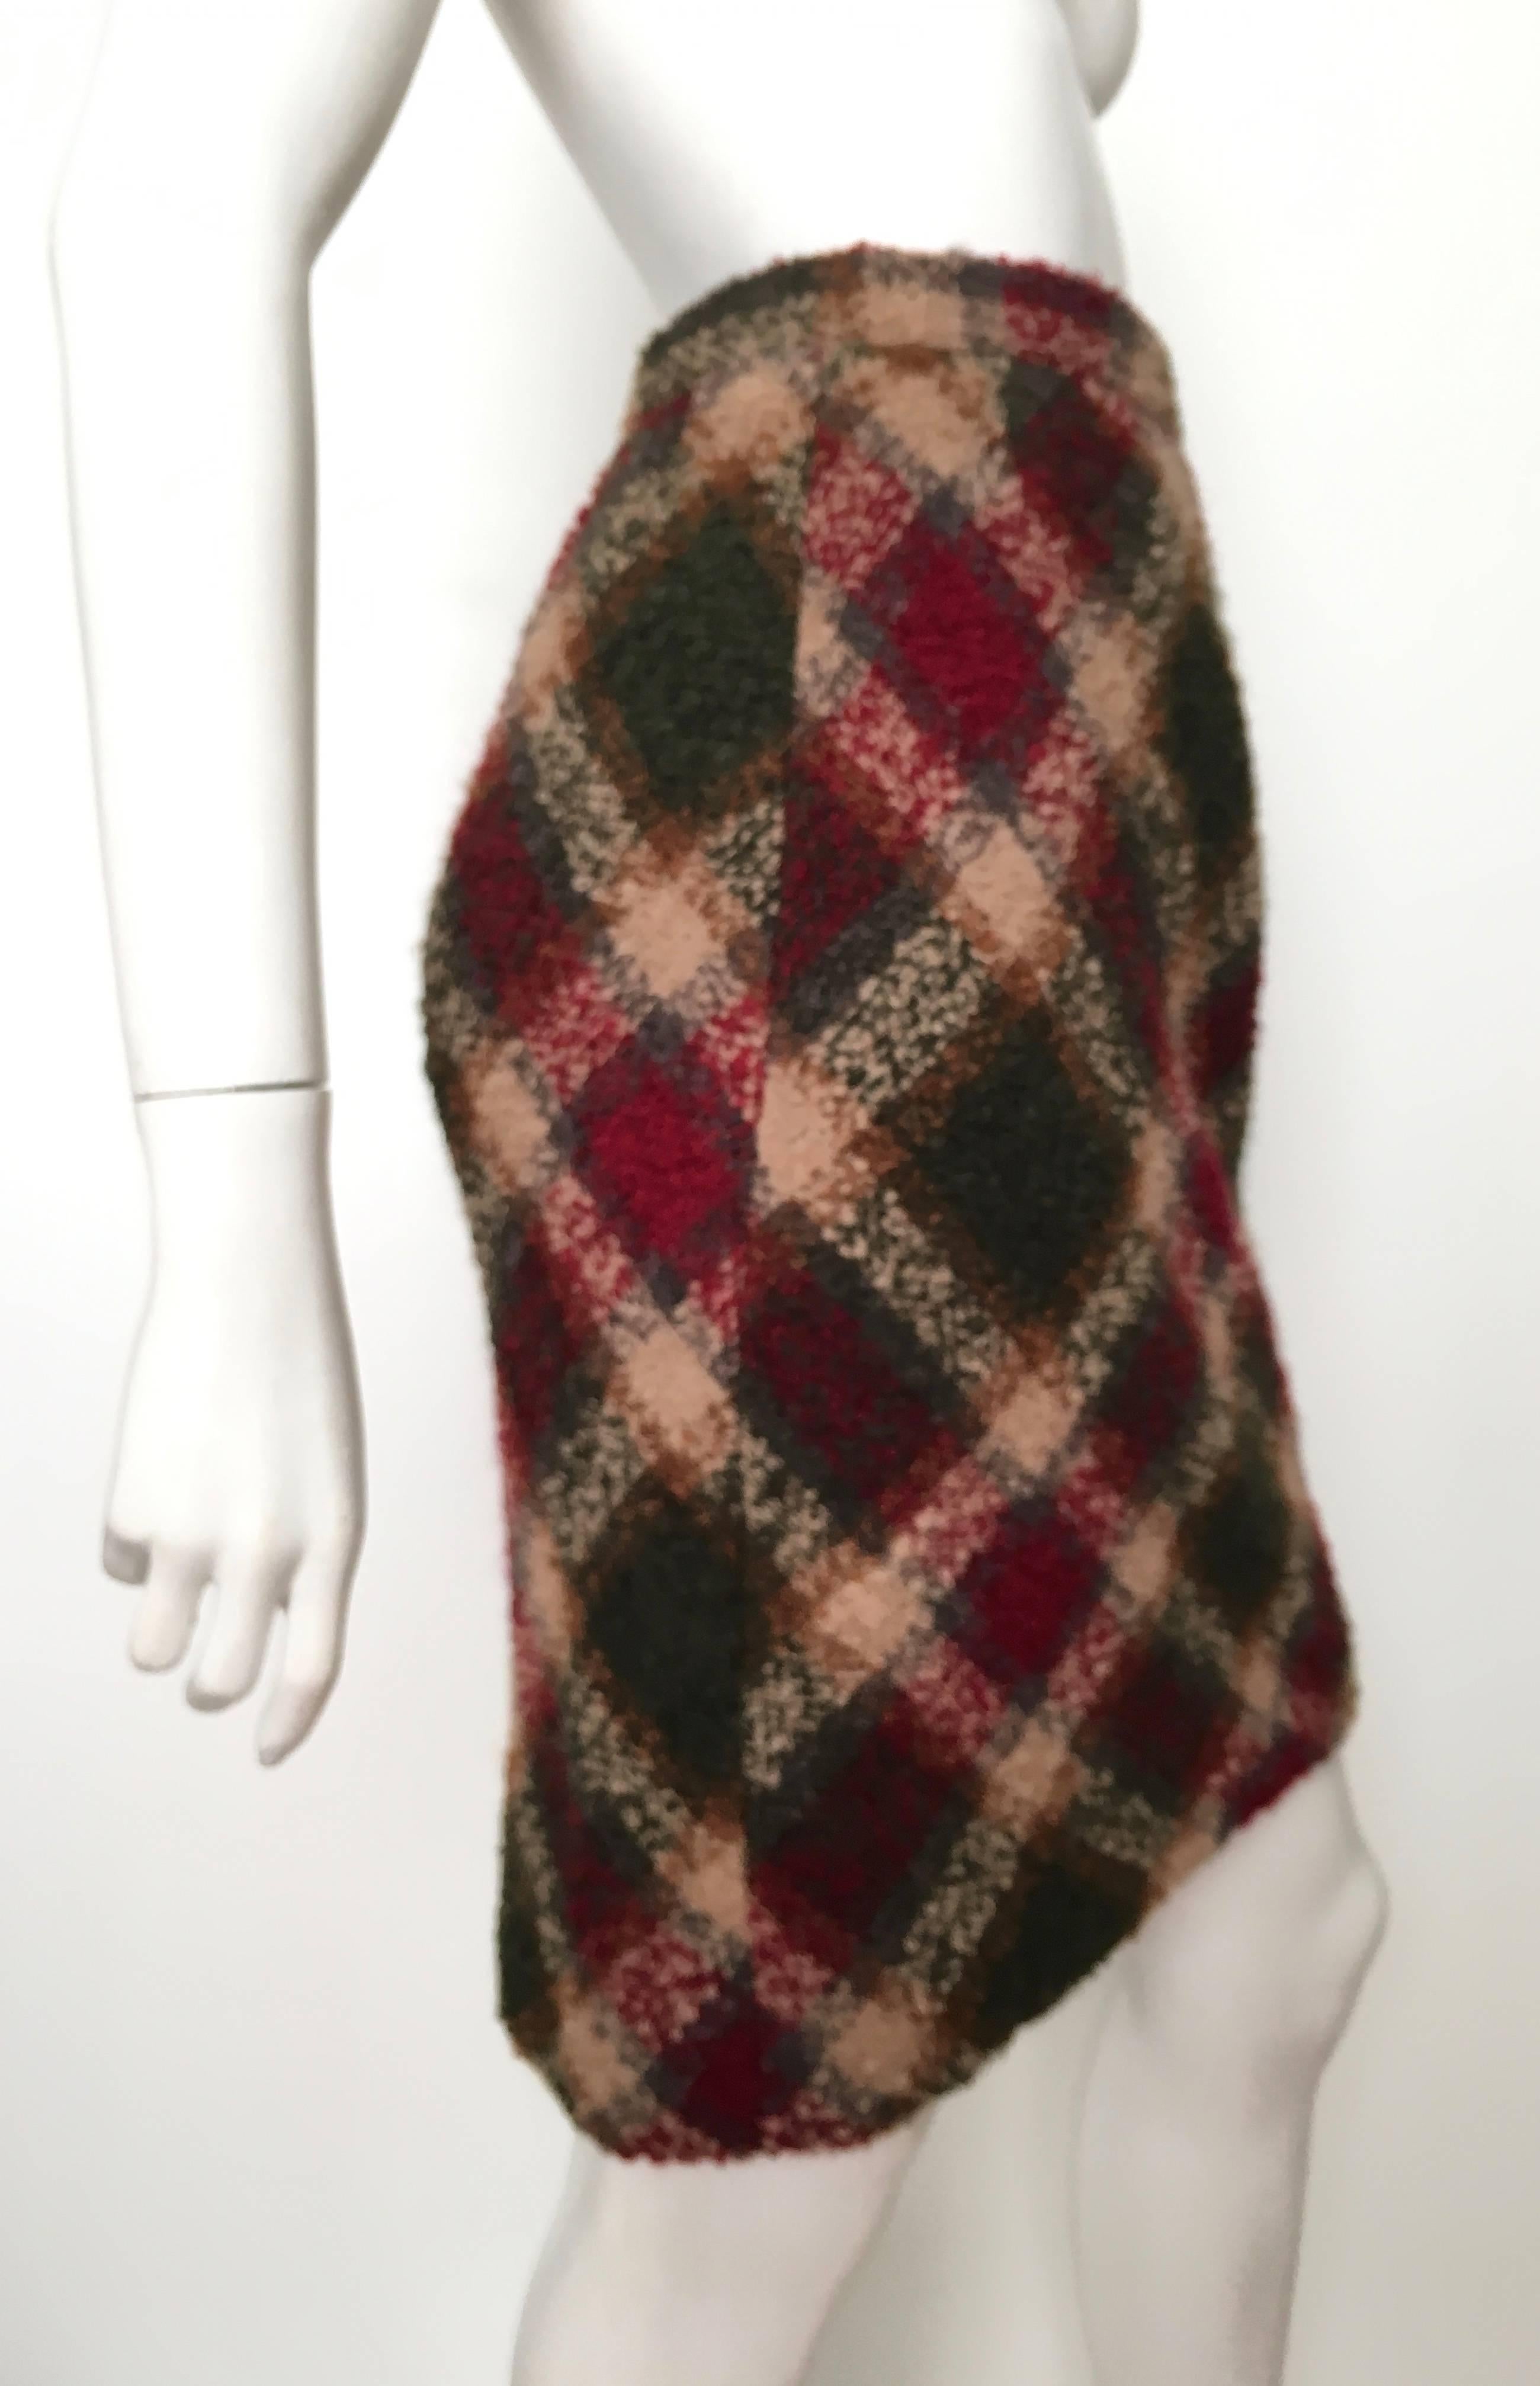 Bill Blass 1970s nubby wool plaid print skirt is a vintage size 6 and fits like a modern USA size 4.  Ladies please grab your trusted friend, Mr. Tape Measure, so you can properly measure your waist & hips to make certain it will fit you the way